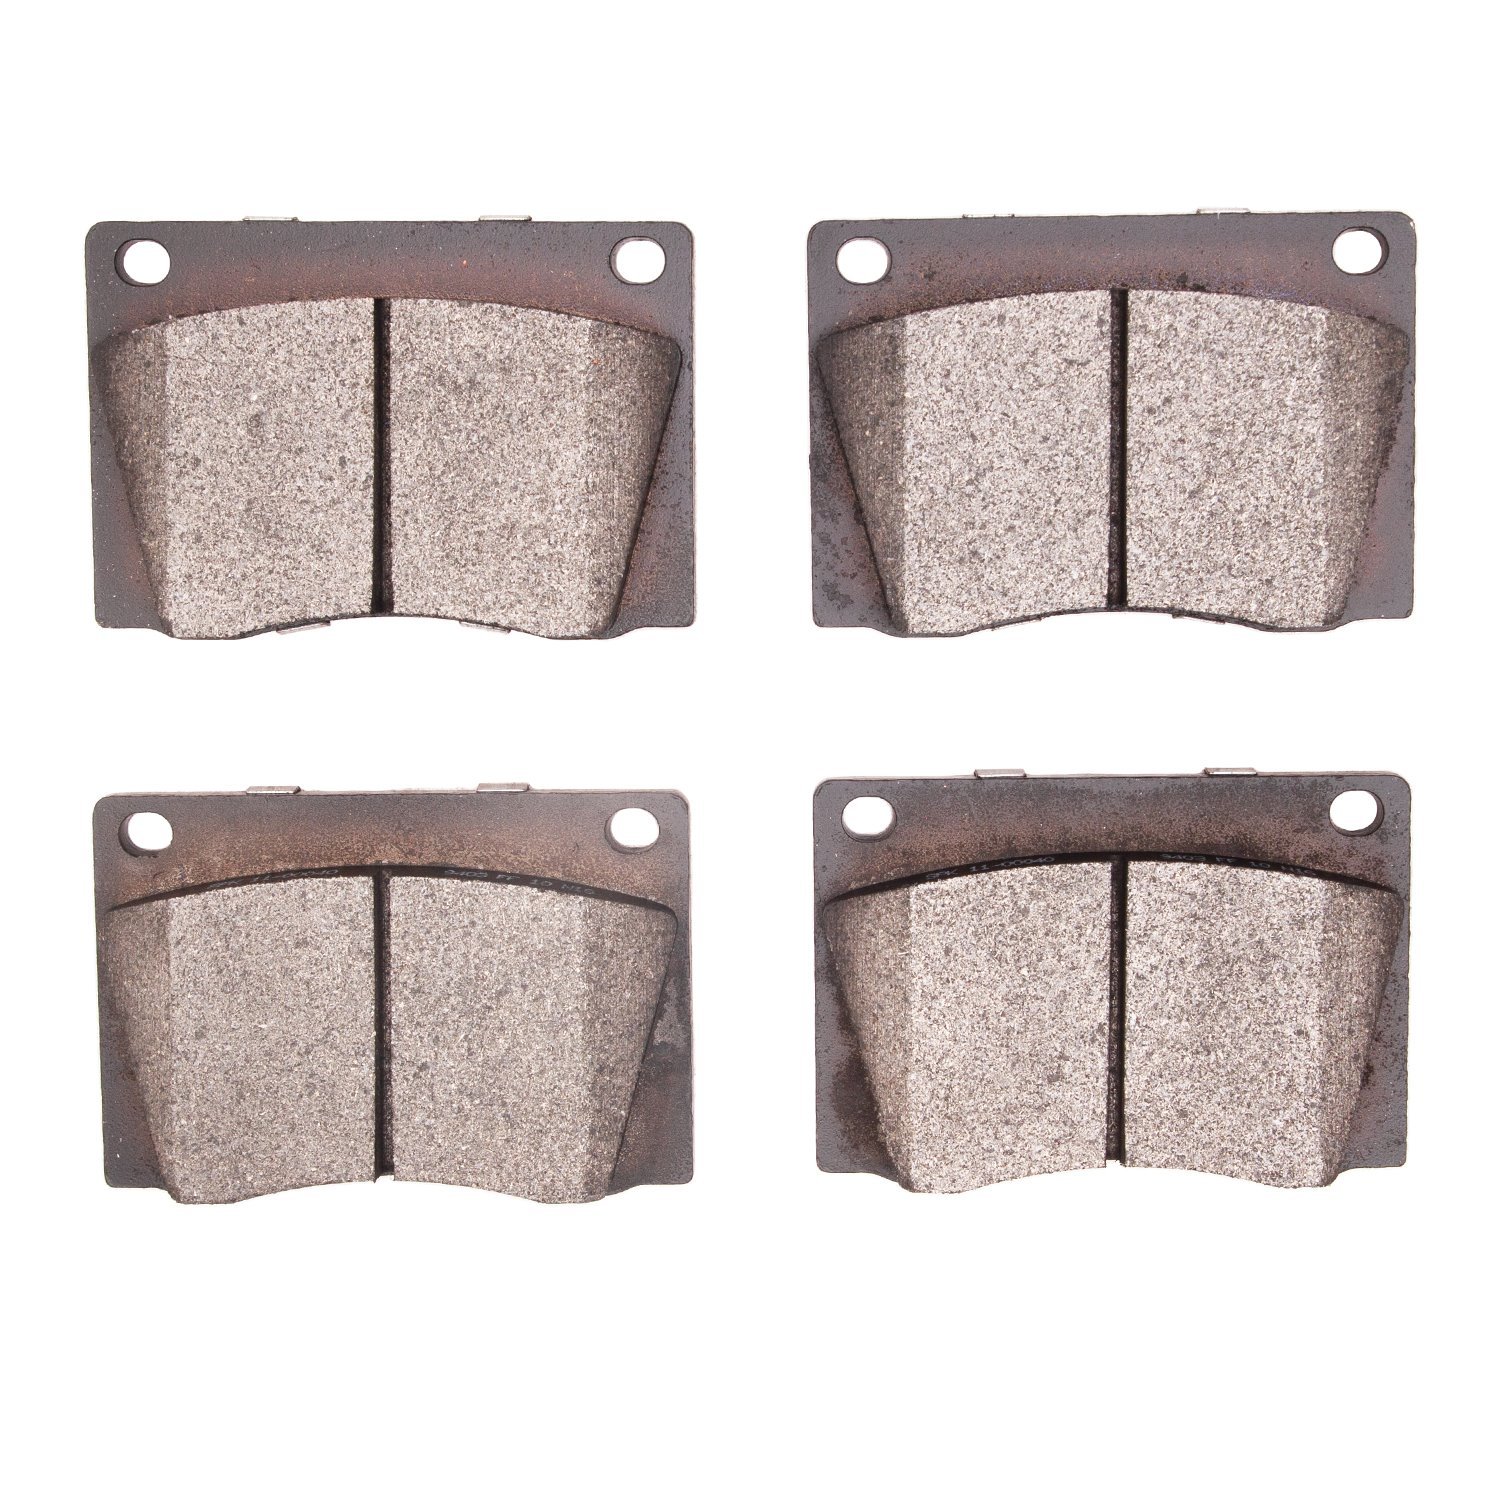 1551-0004-00 5000 Advanced Low-Metallic Brake Pads, 1958-1989 Multiple Makes/Models, Position: Front